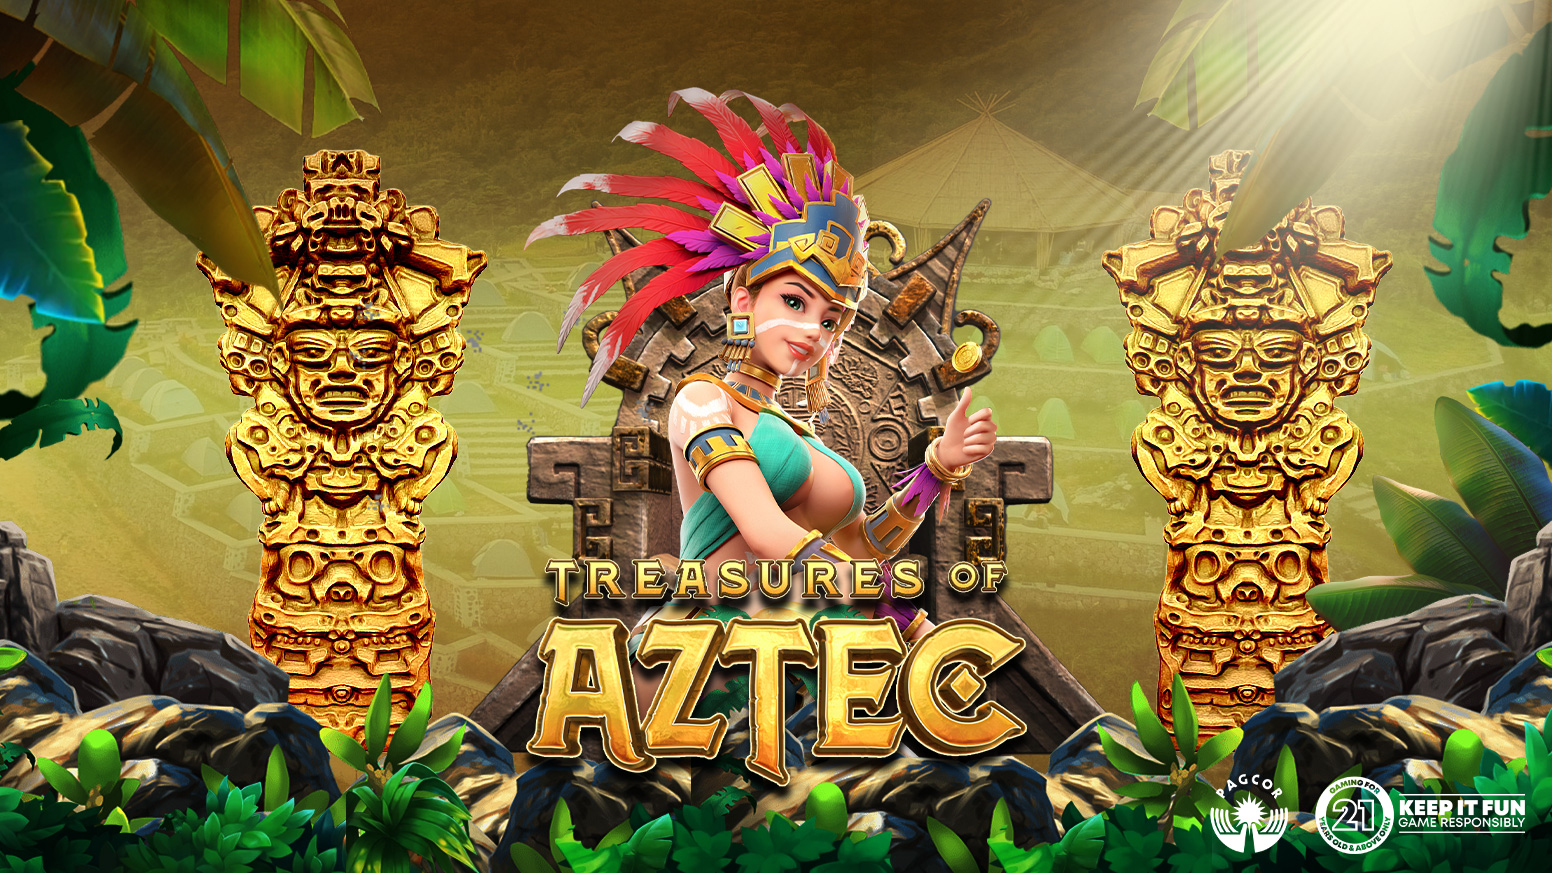 The Aztecs in the Philippines